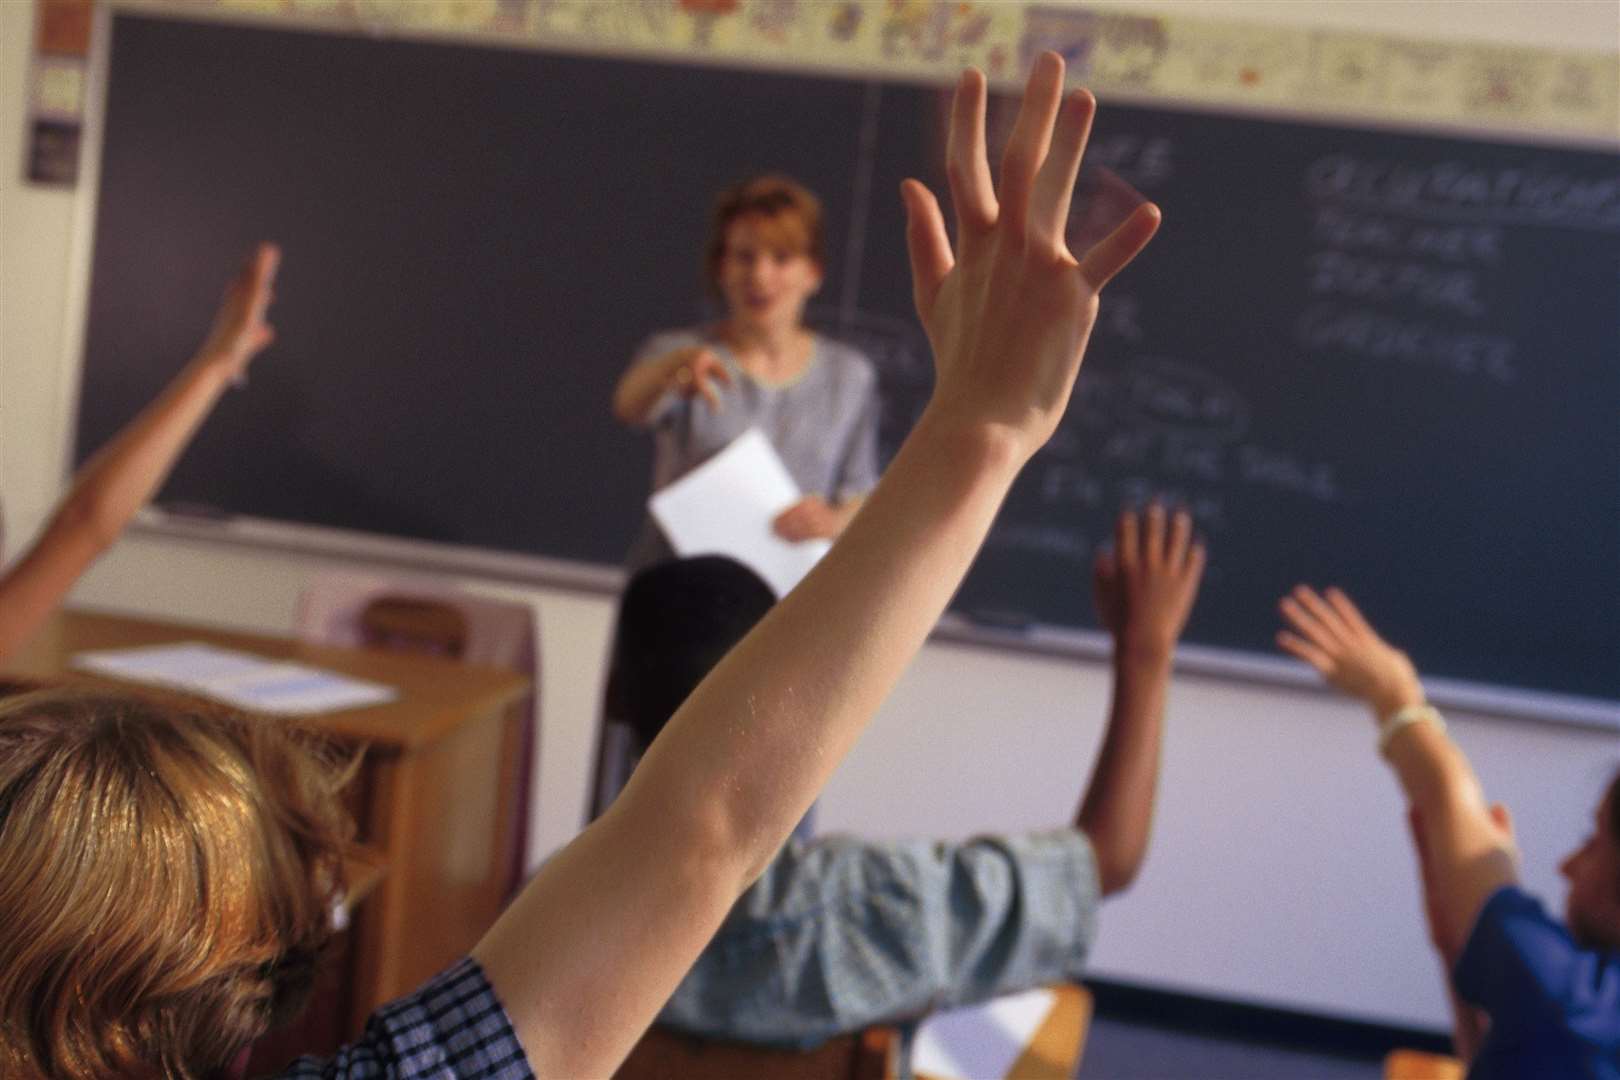 Mrs Murphy - who taught under her maiden name, Miss Sullivan - enjoyed a three-decade career as a supply teacher working at various schools in the county. Stock picture: Comstock/Thinkstock